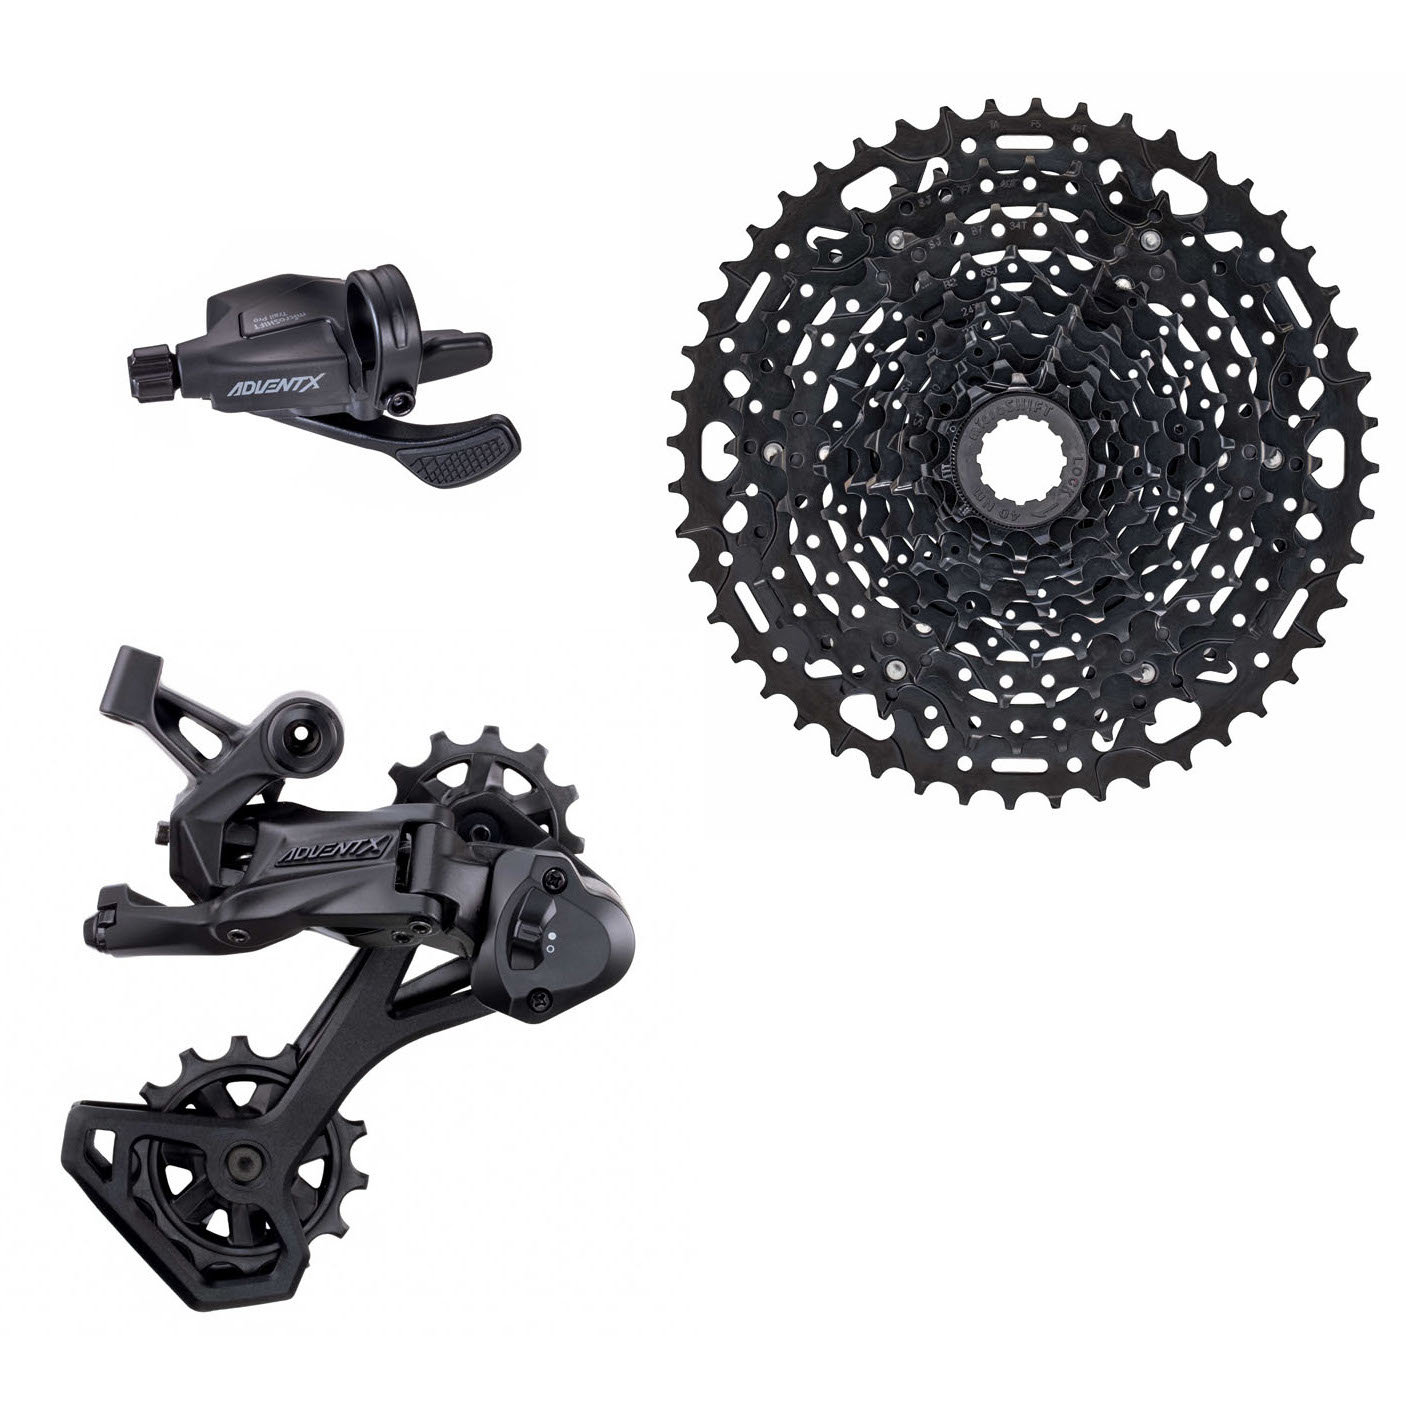 Picture of microSHIFT Advent X Groupset - 1x10-speed - Special Offer